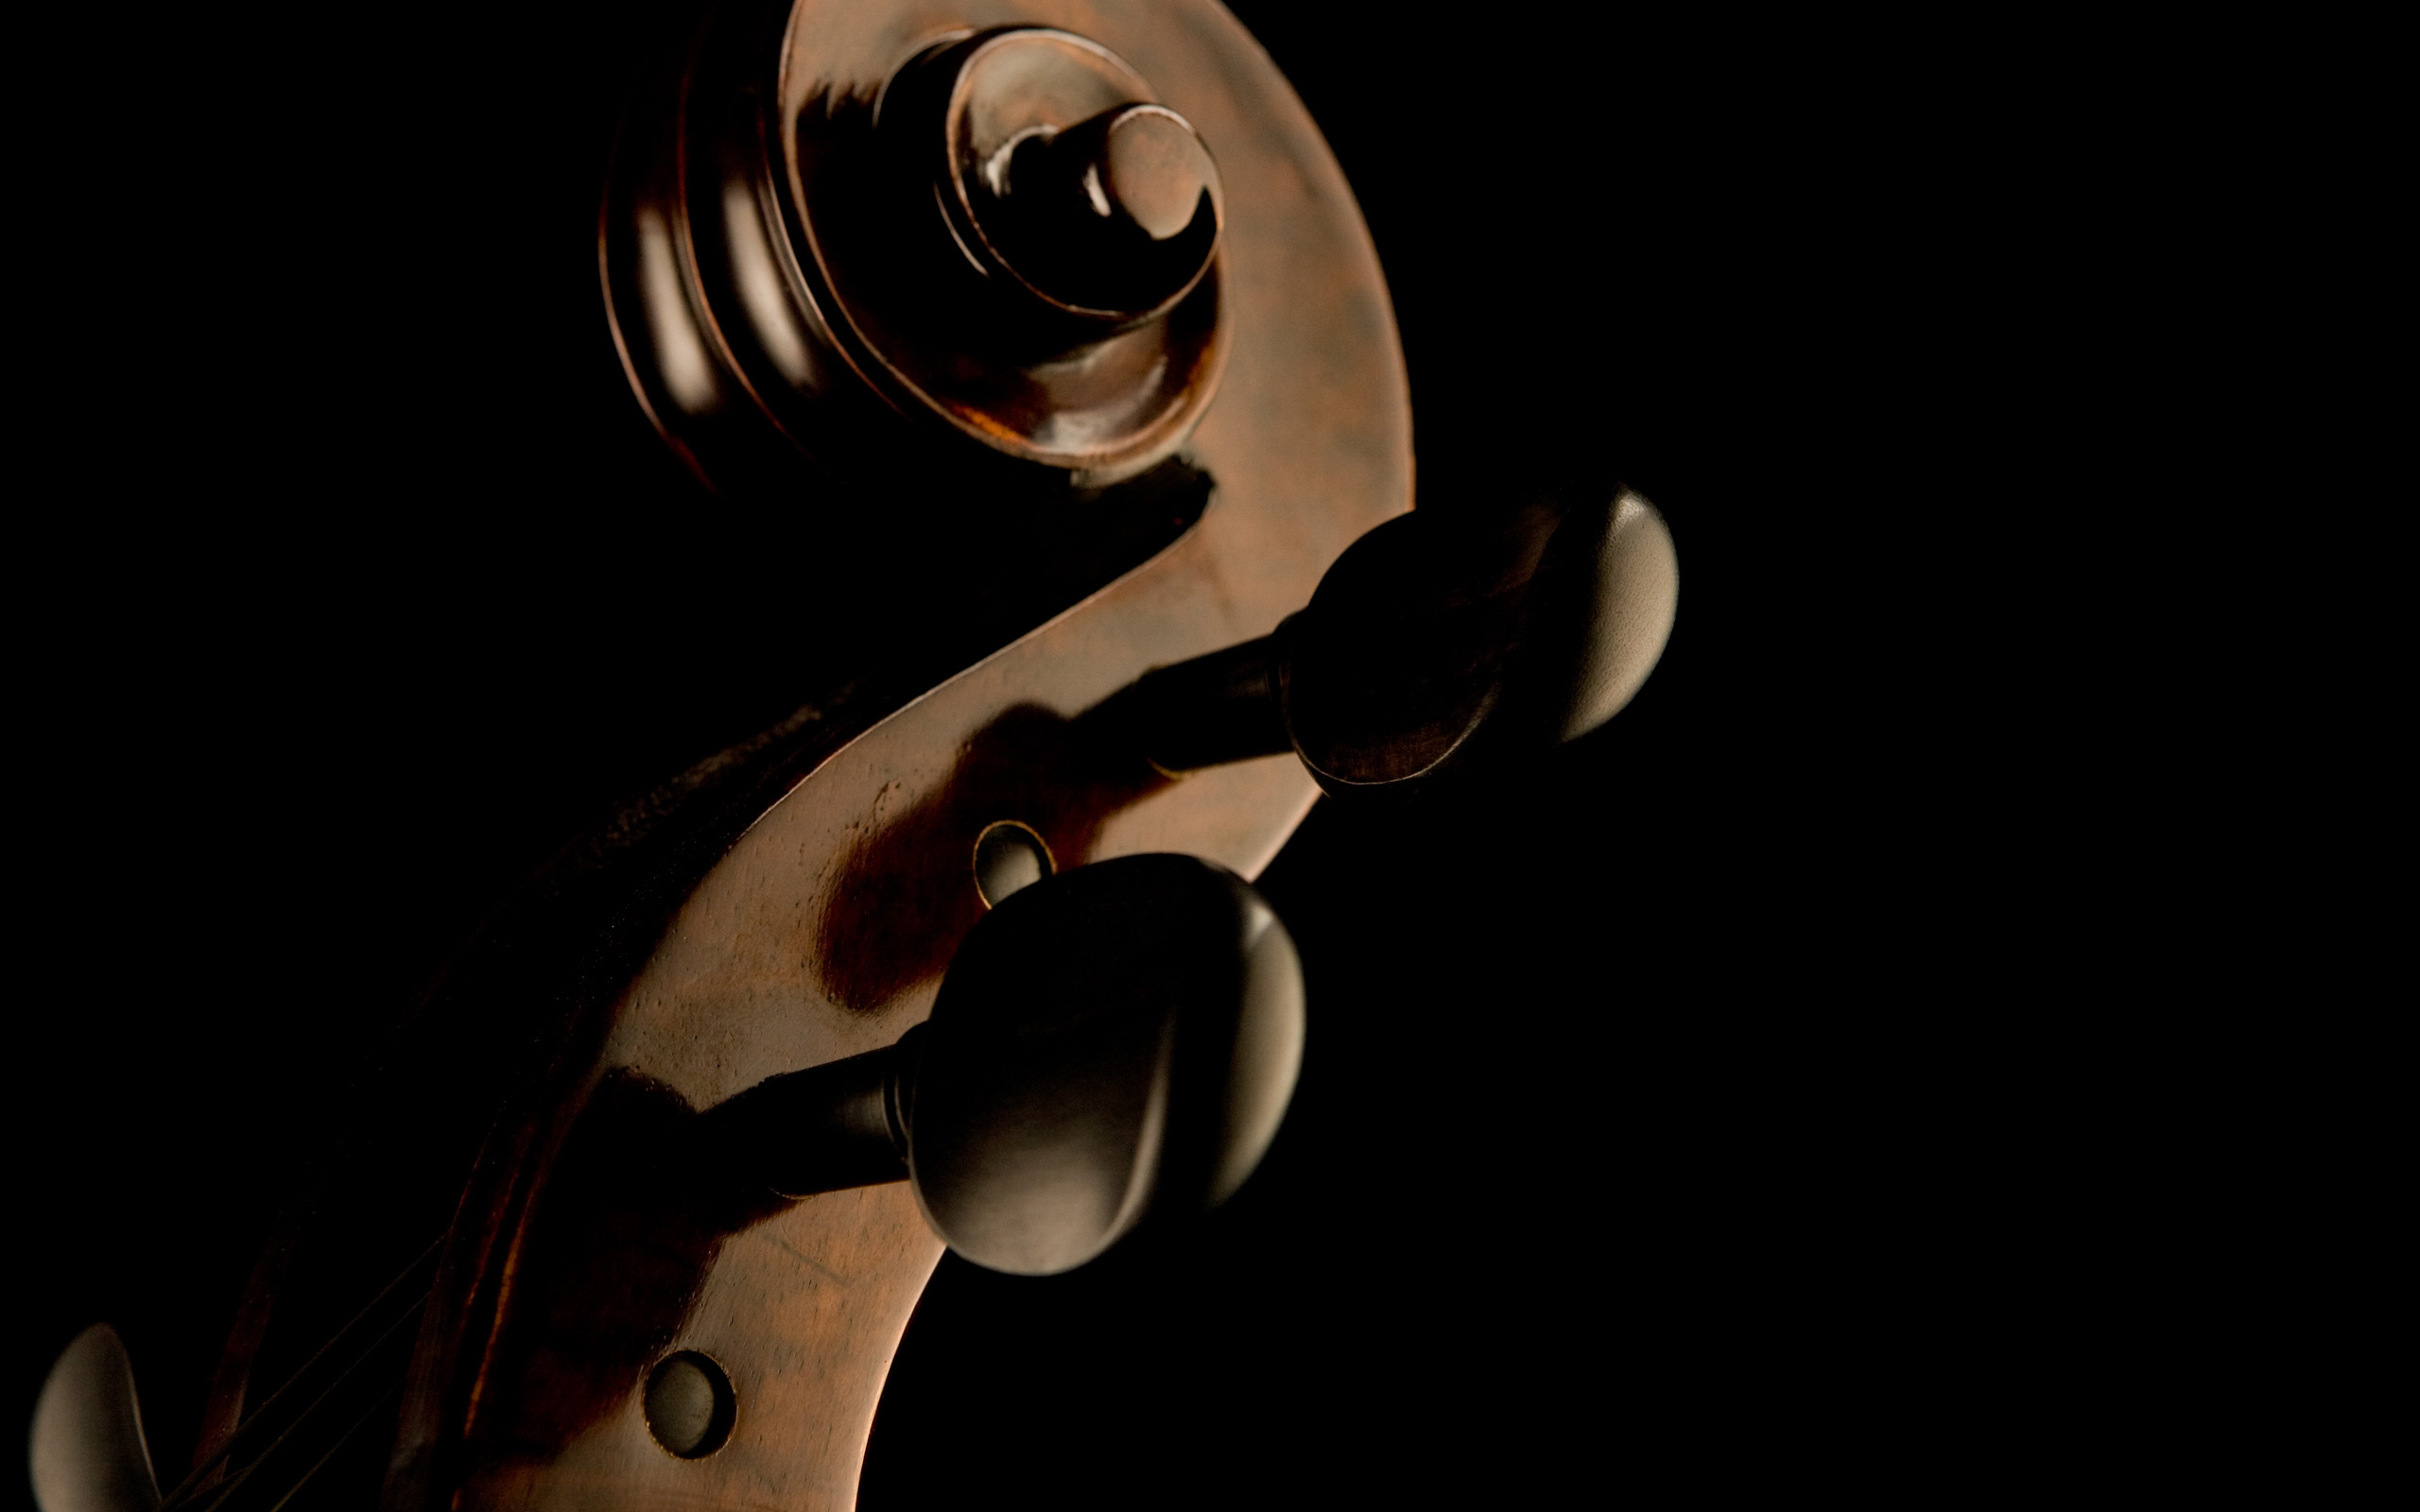 Violoncello: Pegbox, Curved Scroll, Nut And Pegs, Polished Wooden Perfection. 2560x1600 HD Wallpaper.